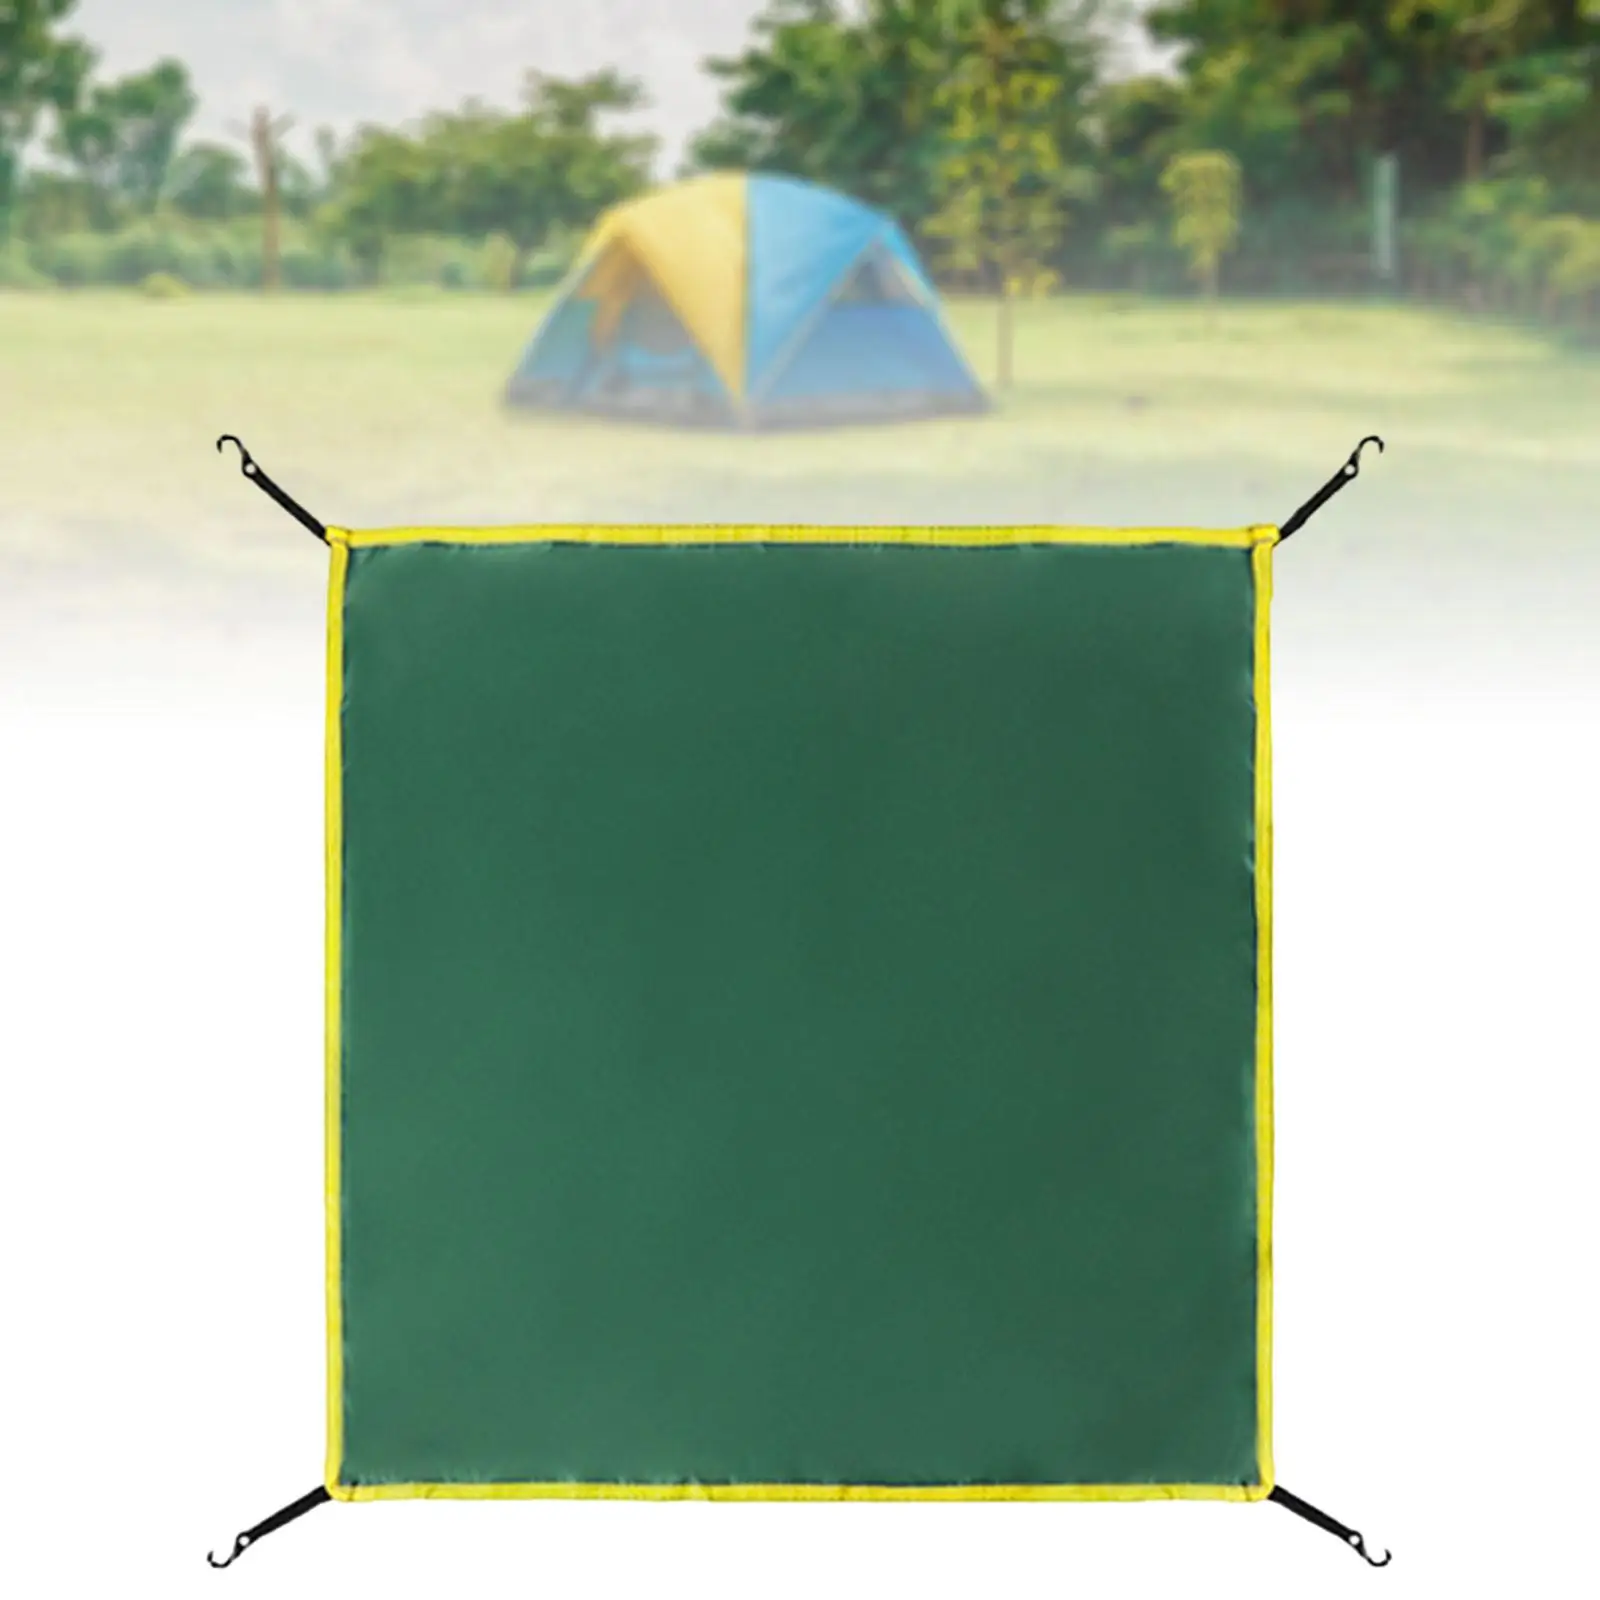 Rainfly Accessory Lightweight Fits 3-4 Person Automatic Tent Tent Top Cover Tarp for Backpacking Hiking Outdoor Supplies Travel